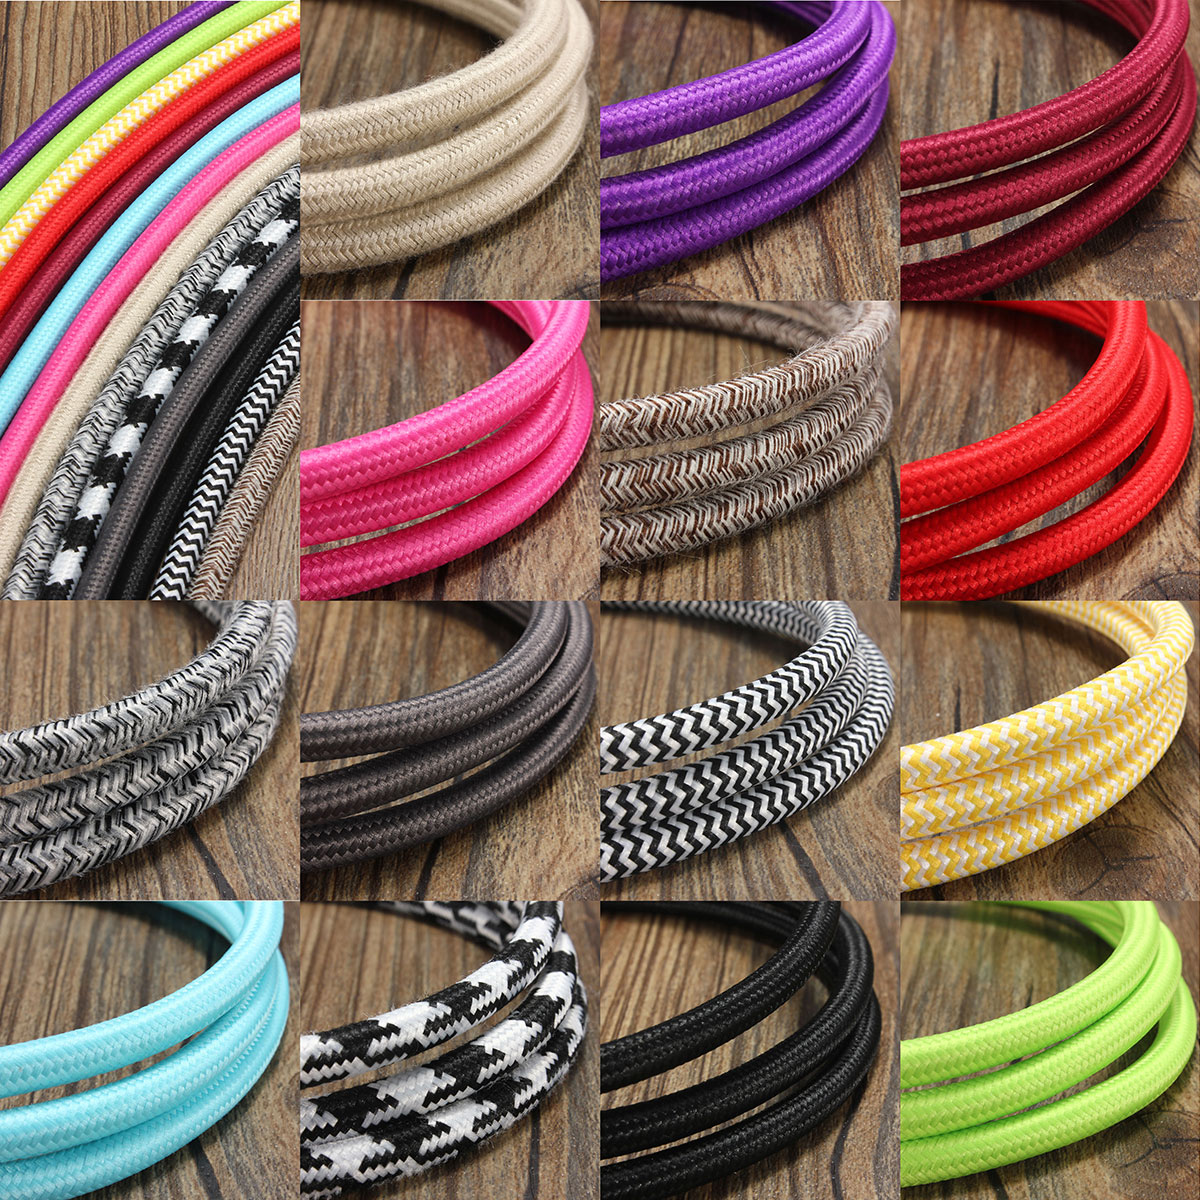 10M-2-Cord-Color-Vintage-Twist-Braided-Fabric-Light-Cable-Electric-Wire-1069140-1